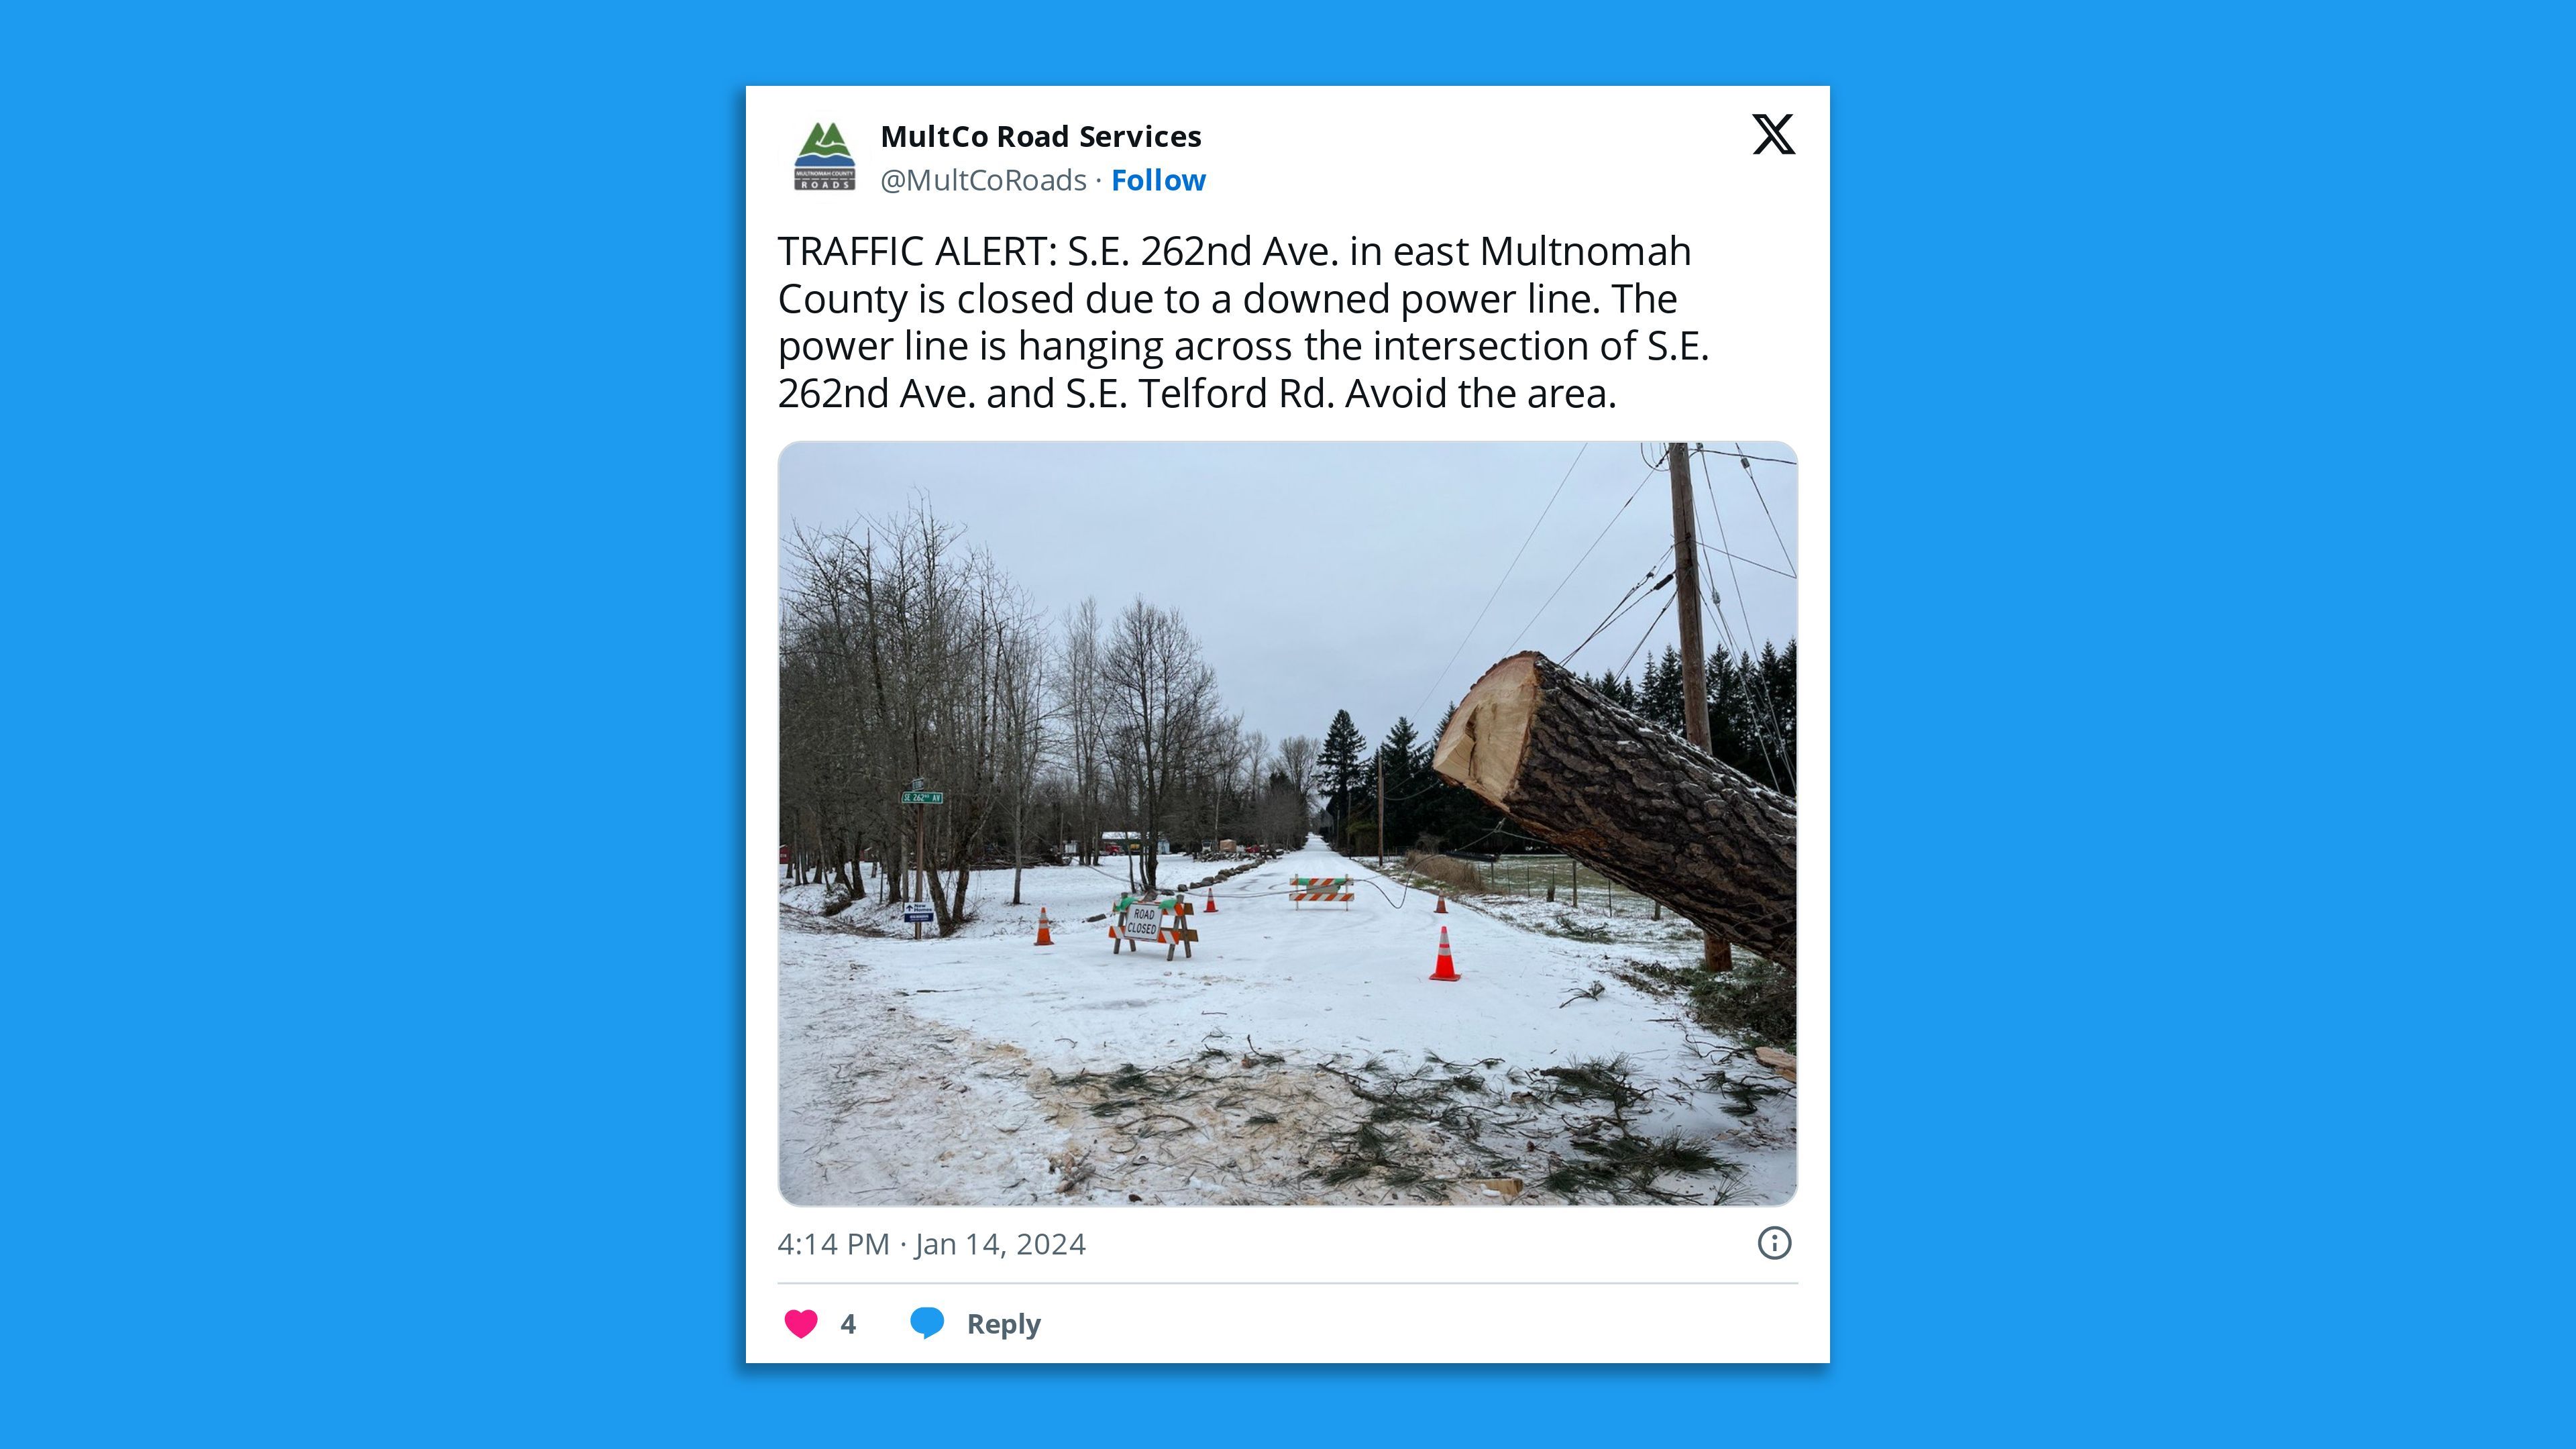 A screenshot of a tweet by Oregon's Multnomah County Road Services saying: "TRAFFIC ALERT: S.E. 262nd Ave. in east Multnomah County is closed due to a downed power line. The power line is hanging across the intersection of S.E. 262nd Ave. and S.E. Telford Rd. Avoid the area."